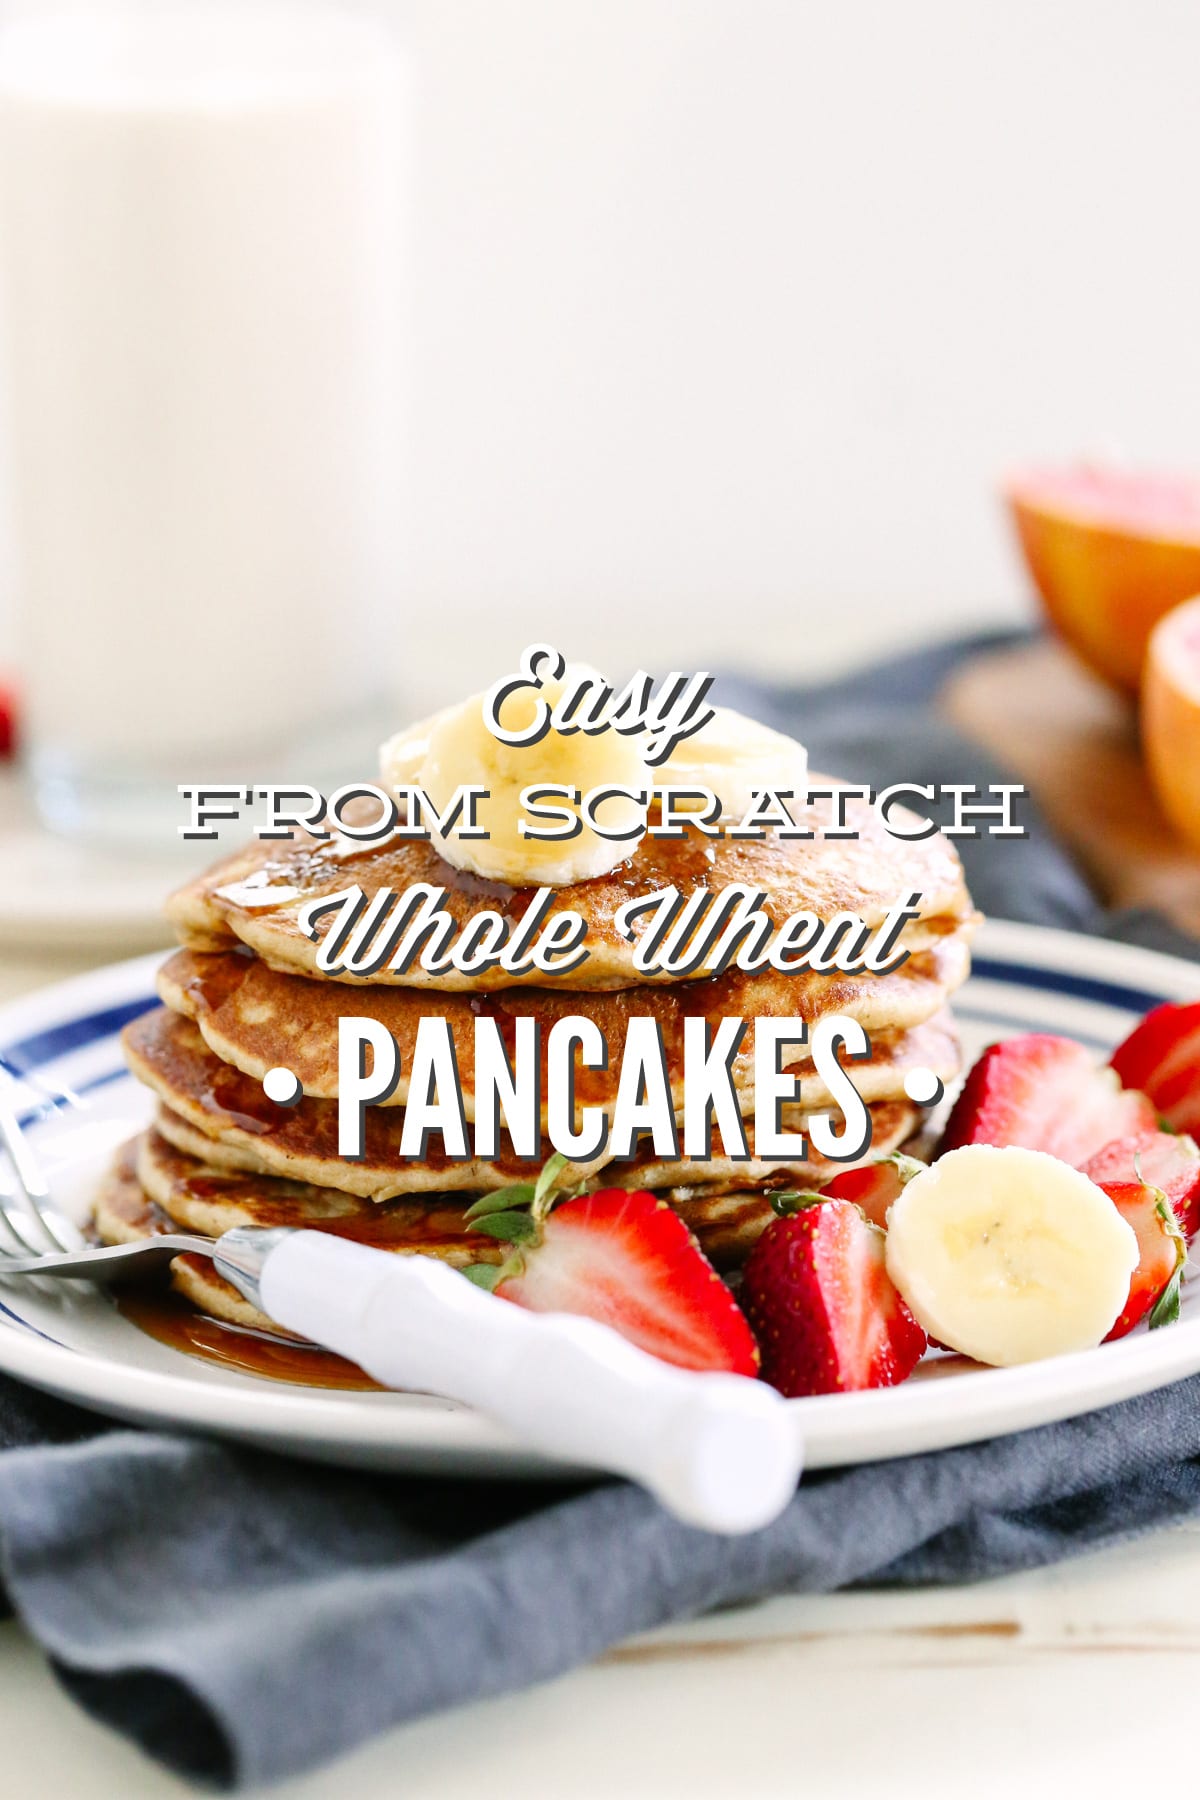 Easy From-Scratch Whole Wheat Pancakes